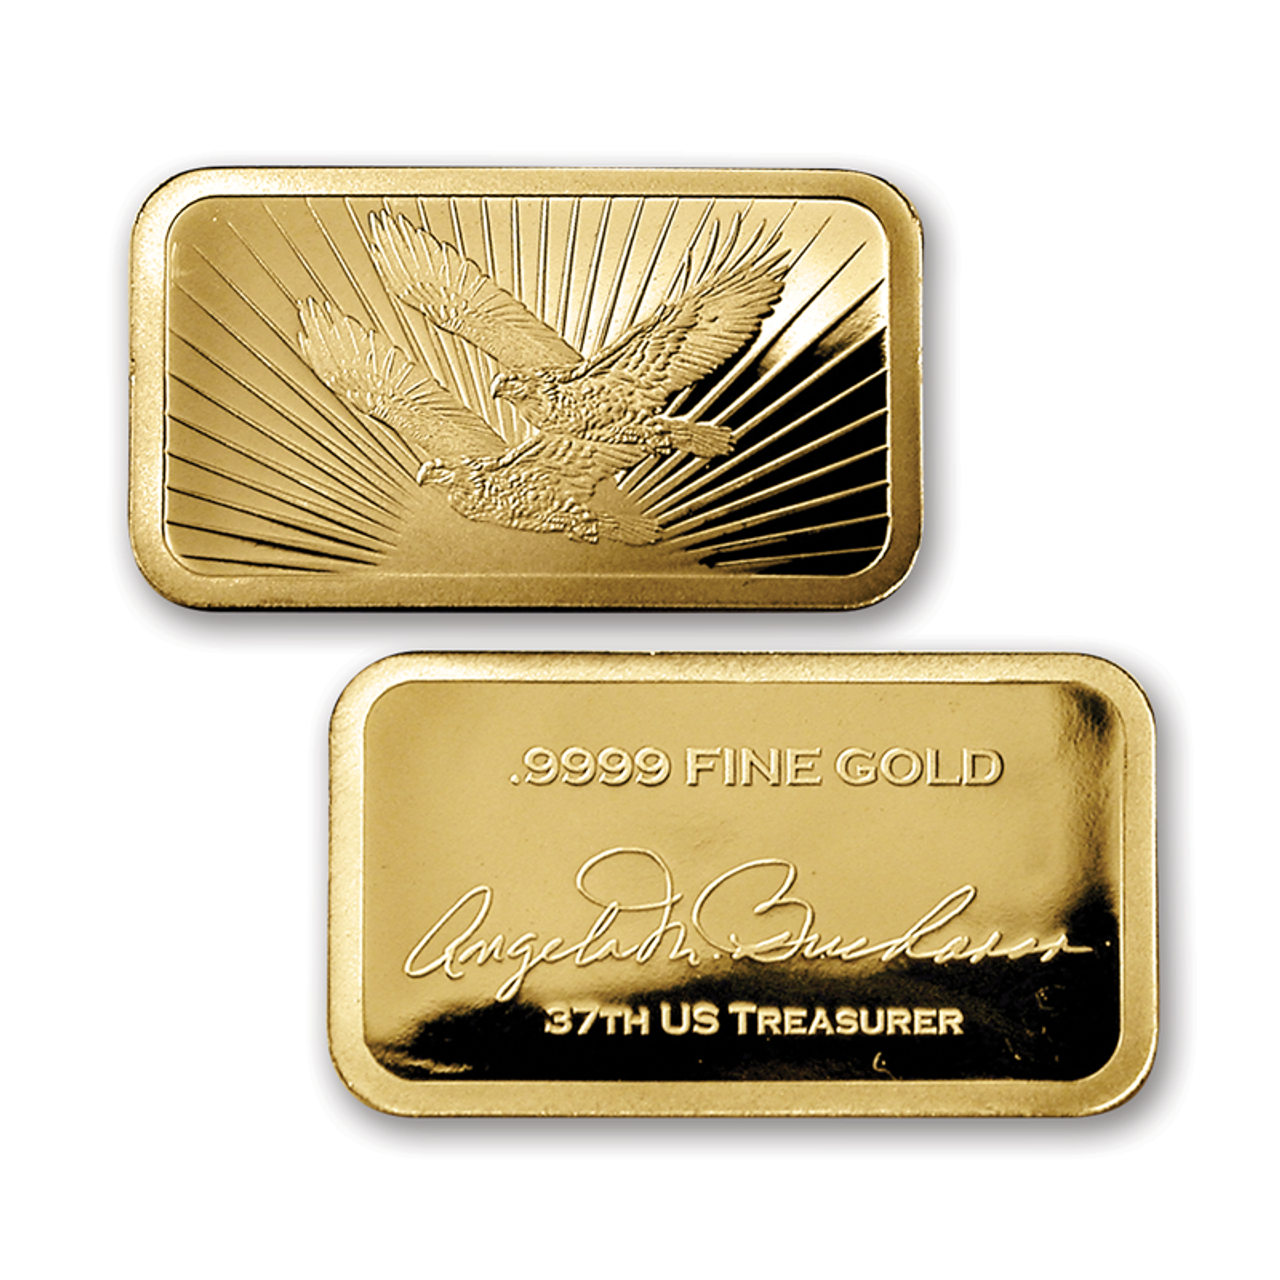 Item name is Double Eagle Pure Gold Bars. Date is N/A. Item size is 15 millimeters by 8 millimeters. Item weight and composition is 1/100 th of an ounce of .9999 pure gold. Item shape is Rectangular with smooth edge. Mint Mark is N/A. Design elements on obverse are Two eagles flying, rising sun and rays. Design elements on reverse are gold purity, Angela Buchanan signature, 37th US Treasurer. The item's condition is proof-like. The item's color is metallic.